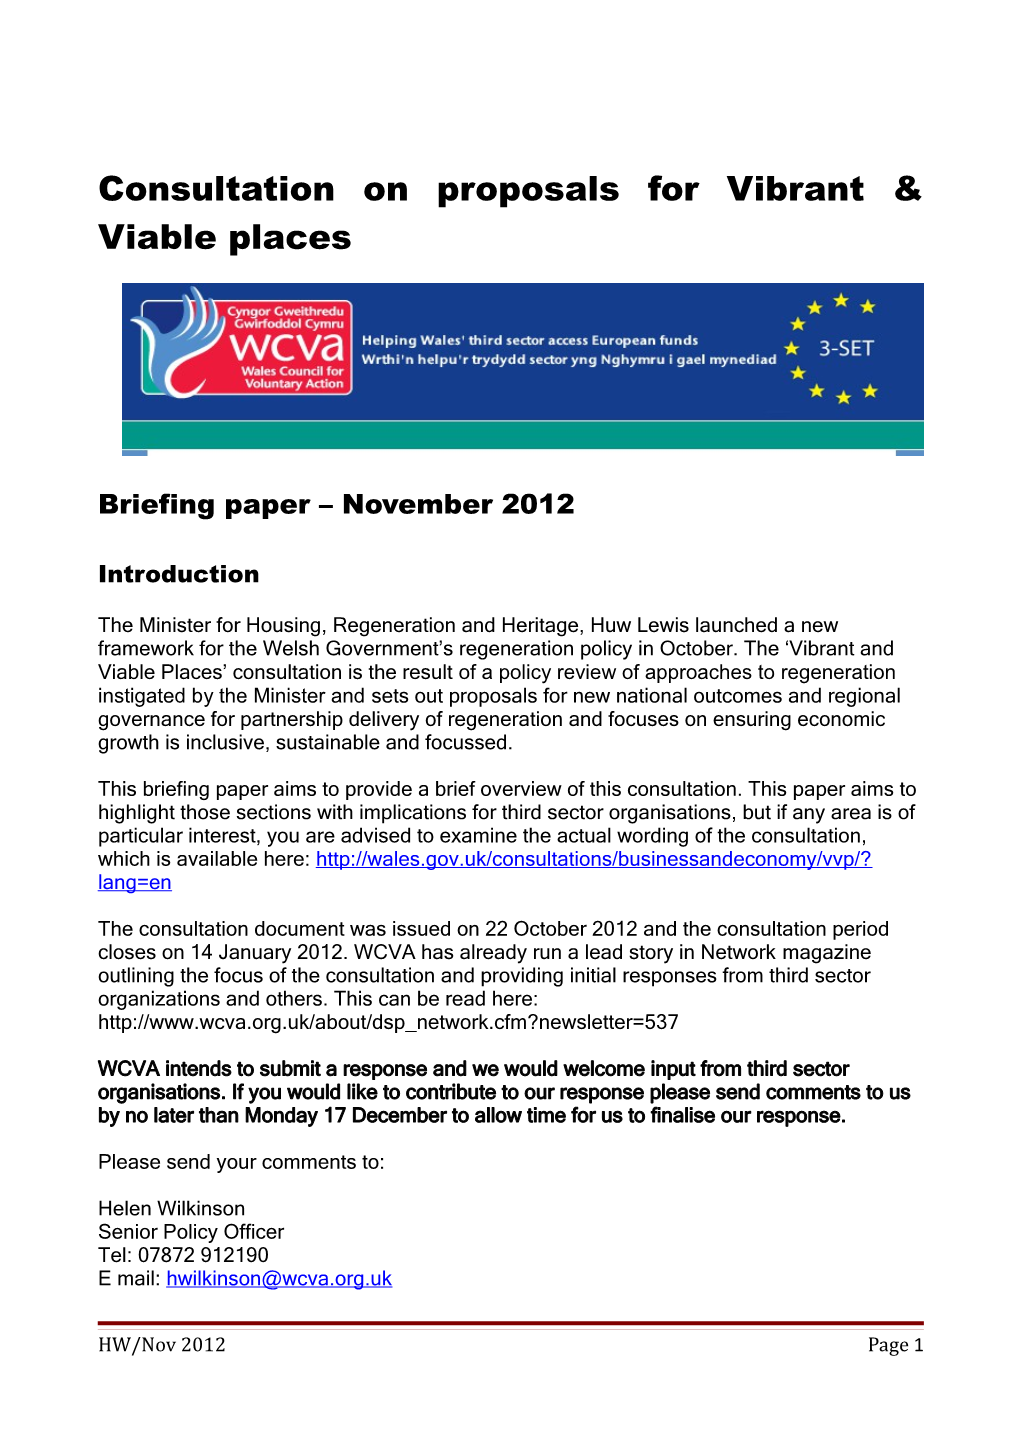 Consultation on Proposals for Vibrant & Viable Places